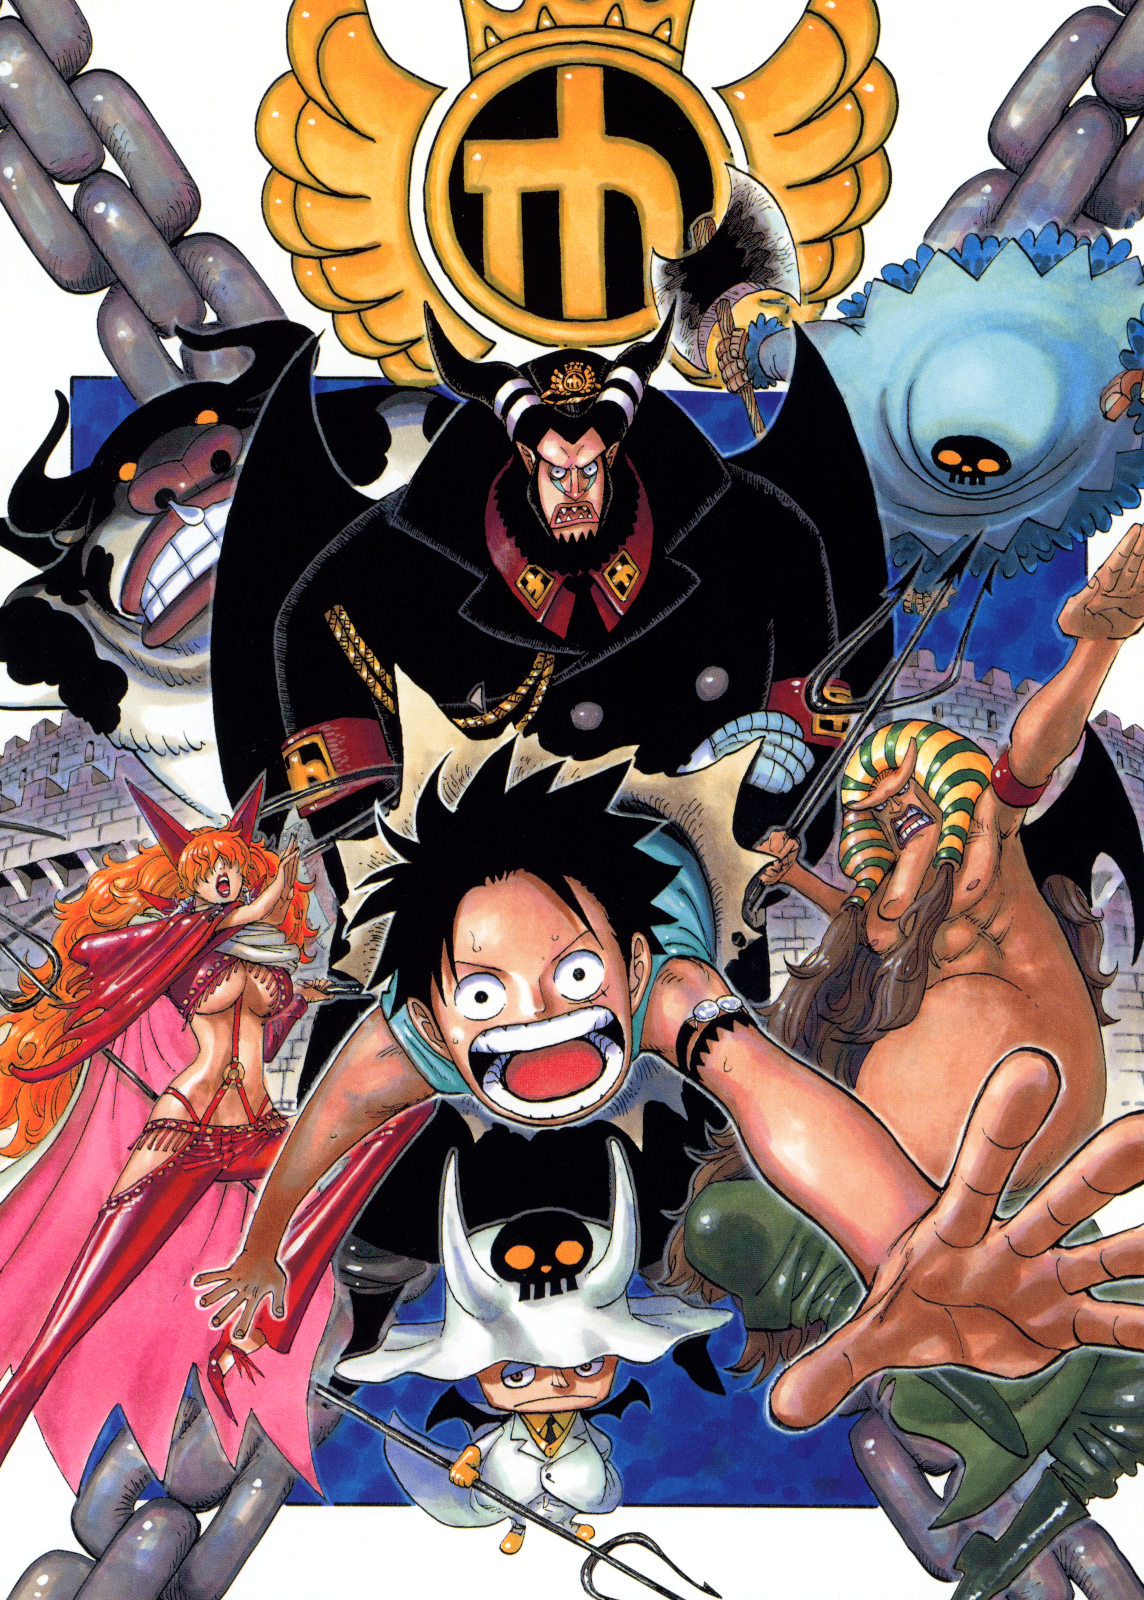 One Piece Filler Episodes and Arcs You Can Skip